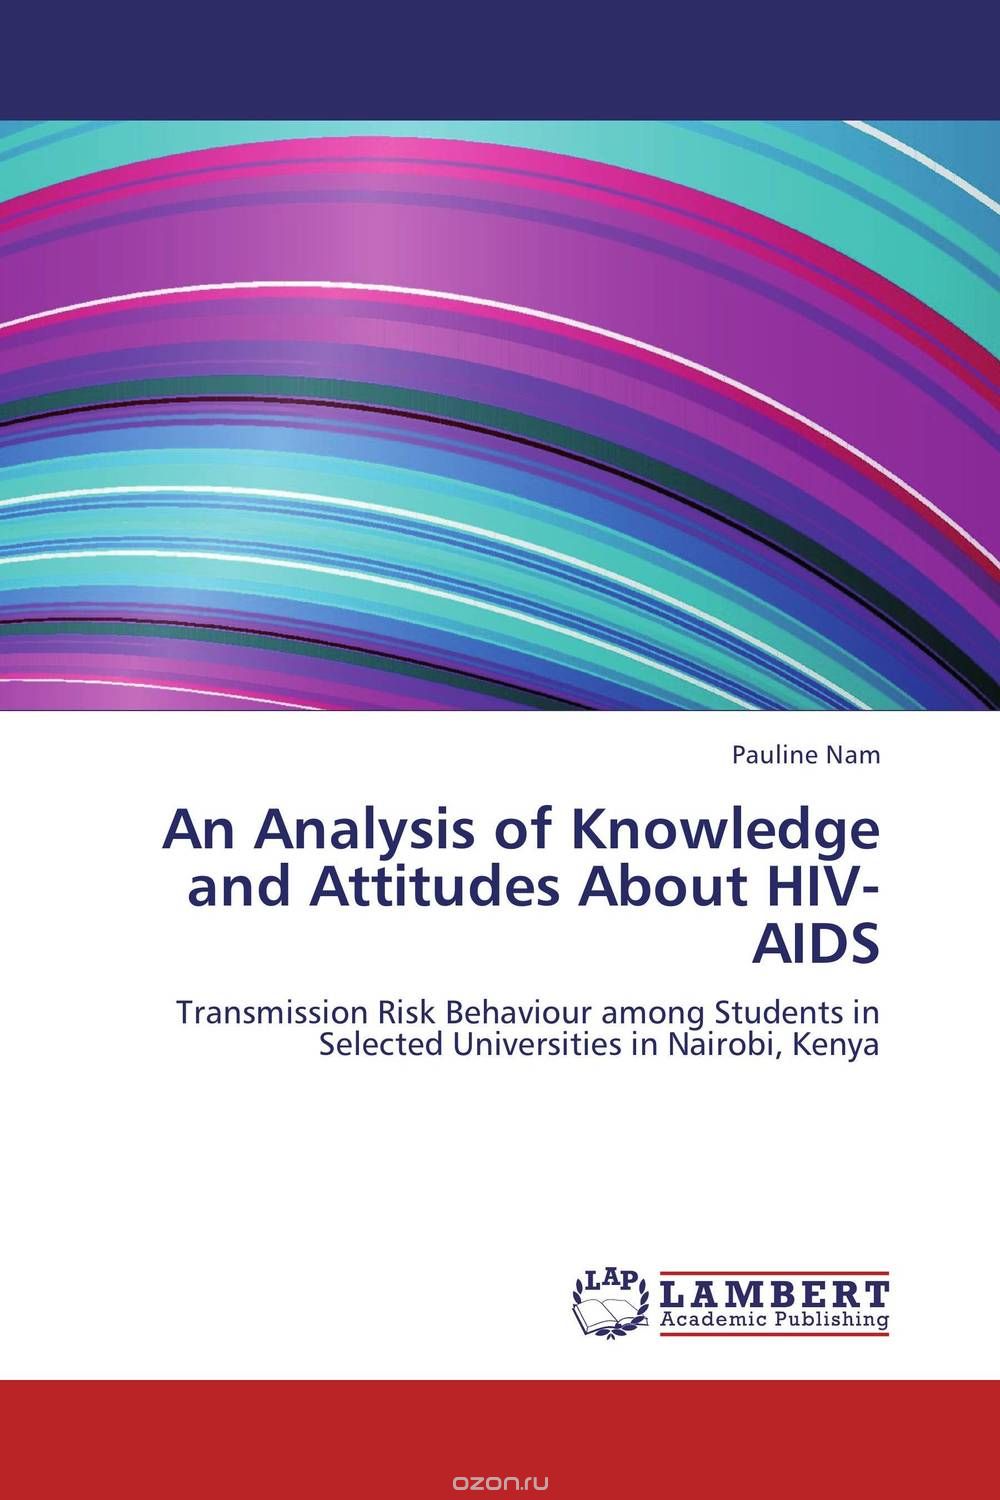 Скачать книгу "An Analysis of Knowledge and Attitudes About HIV-AIDS"